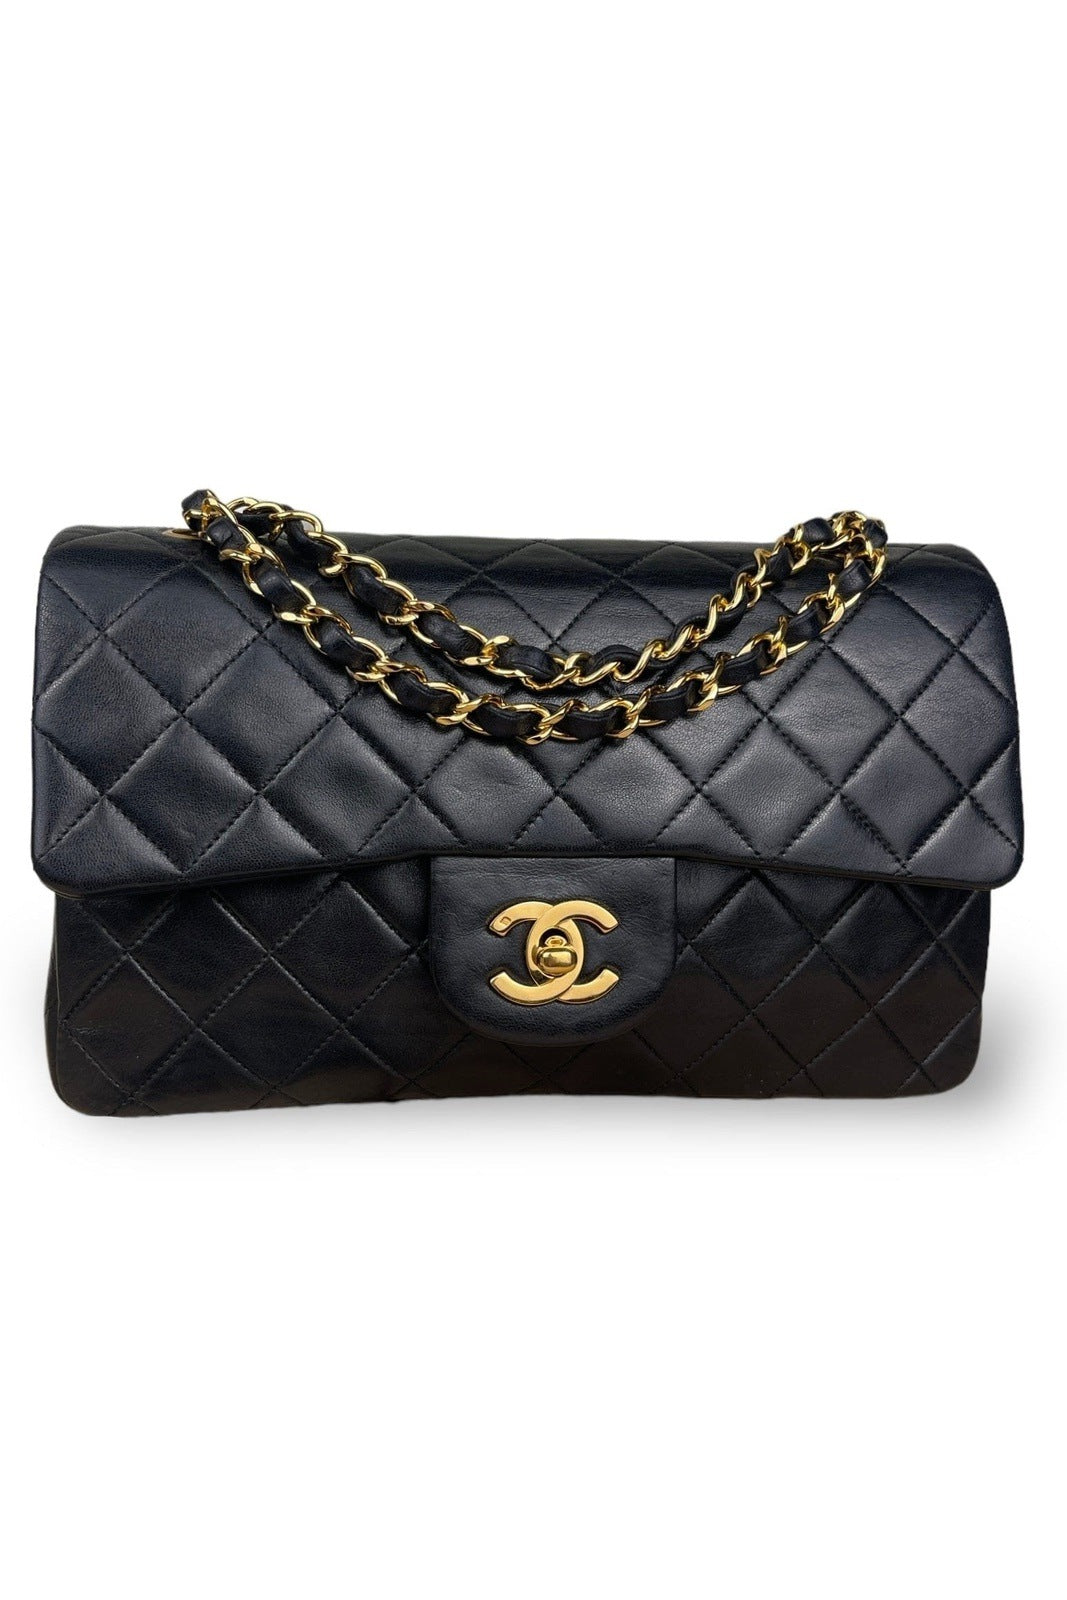 Chanel Large Quilted Caviar Classic Single Flap Shoulder Bag - Beige